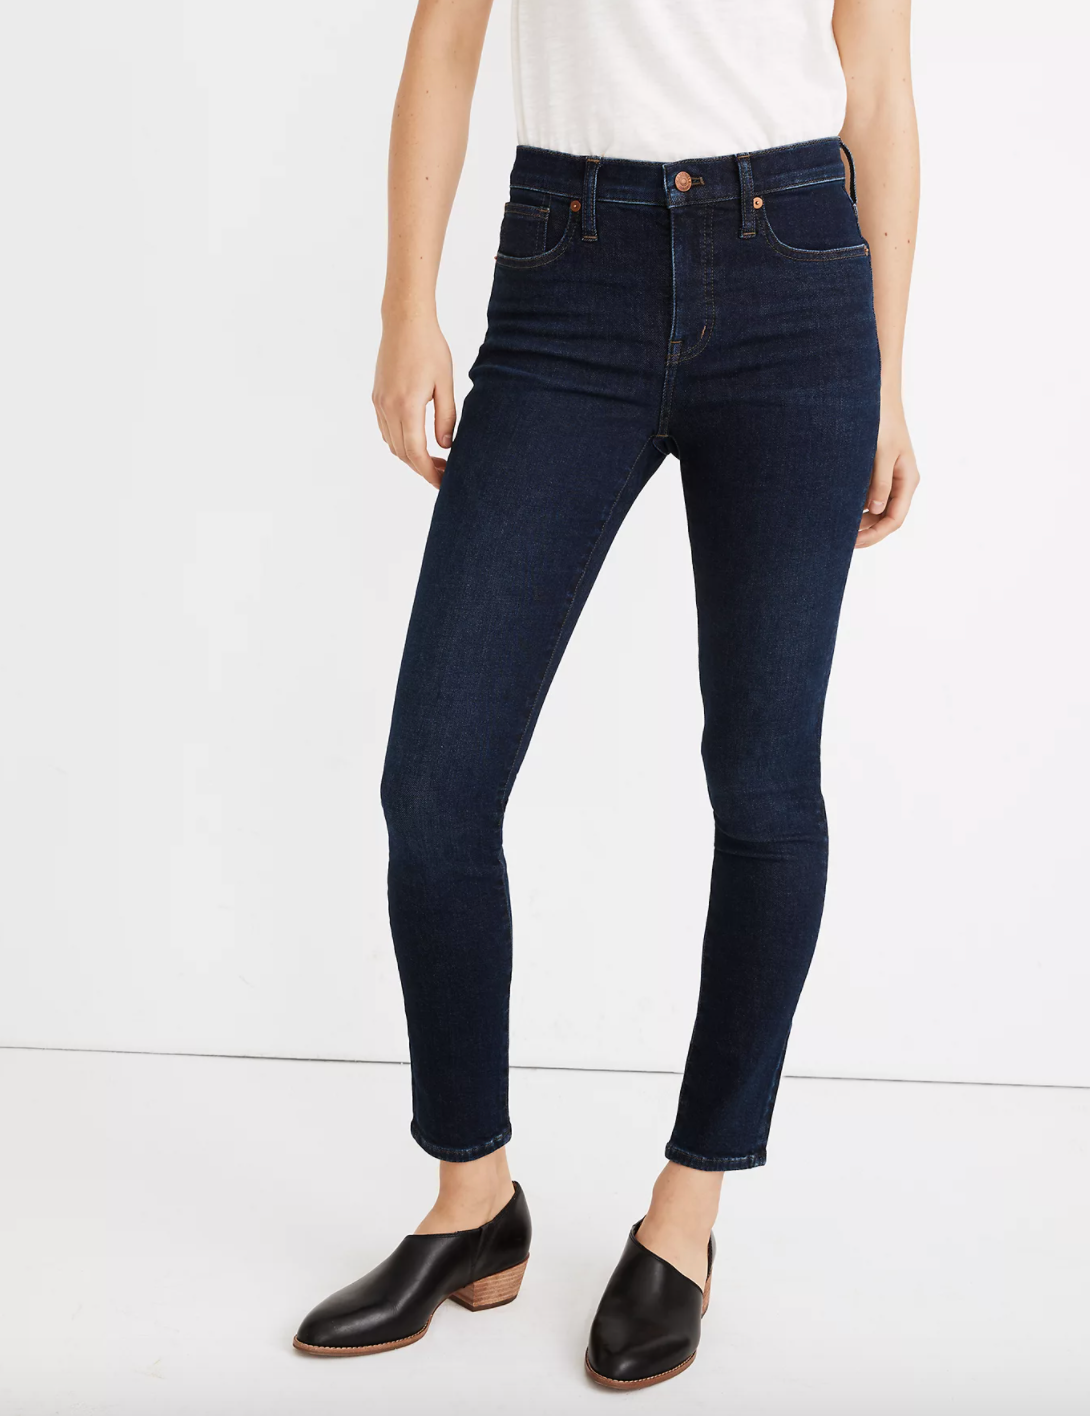 Madewell + 9″ Mid-Rise Skinny Jeans in Orland Wash